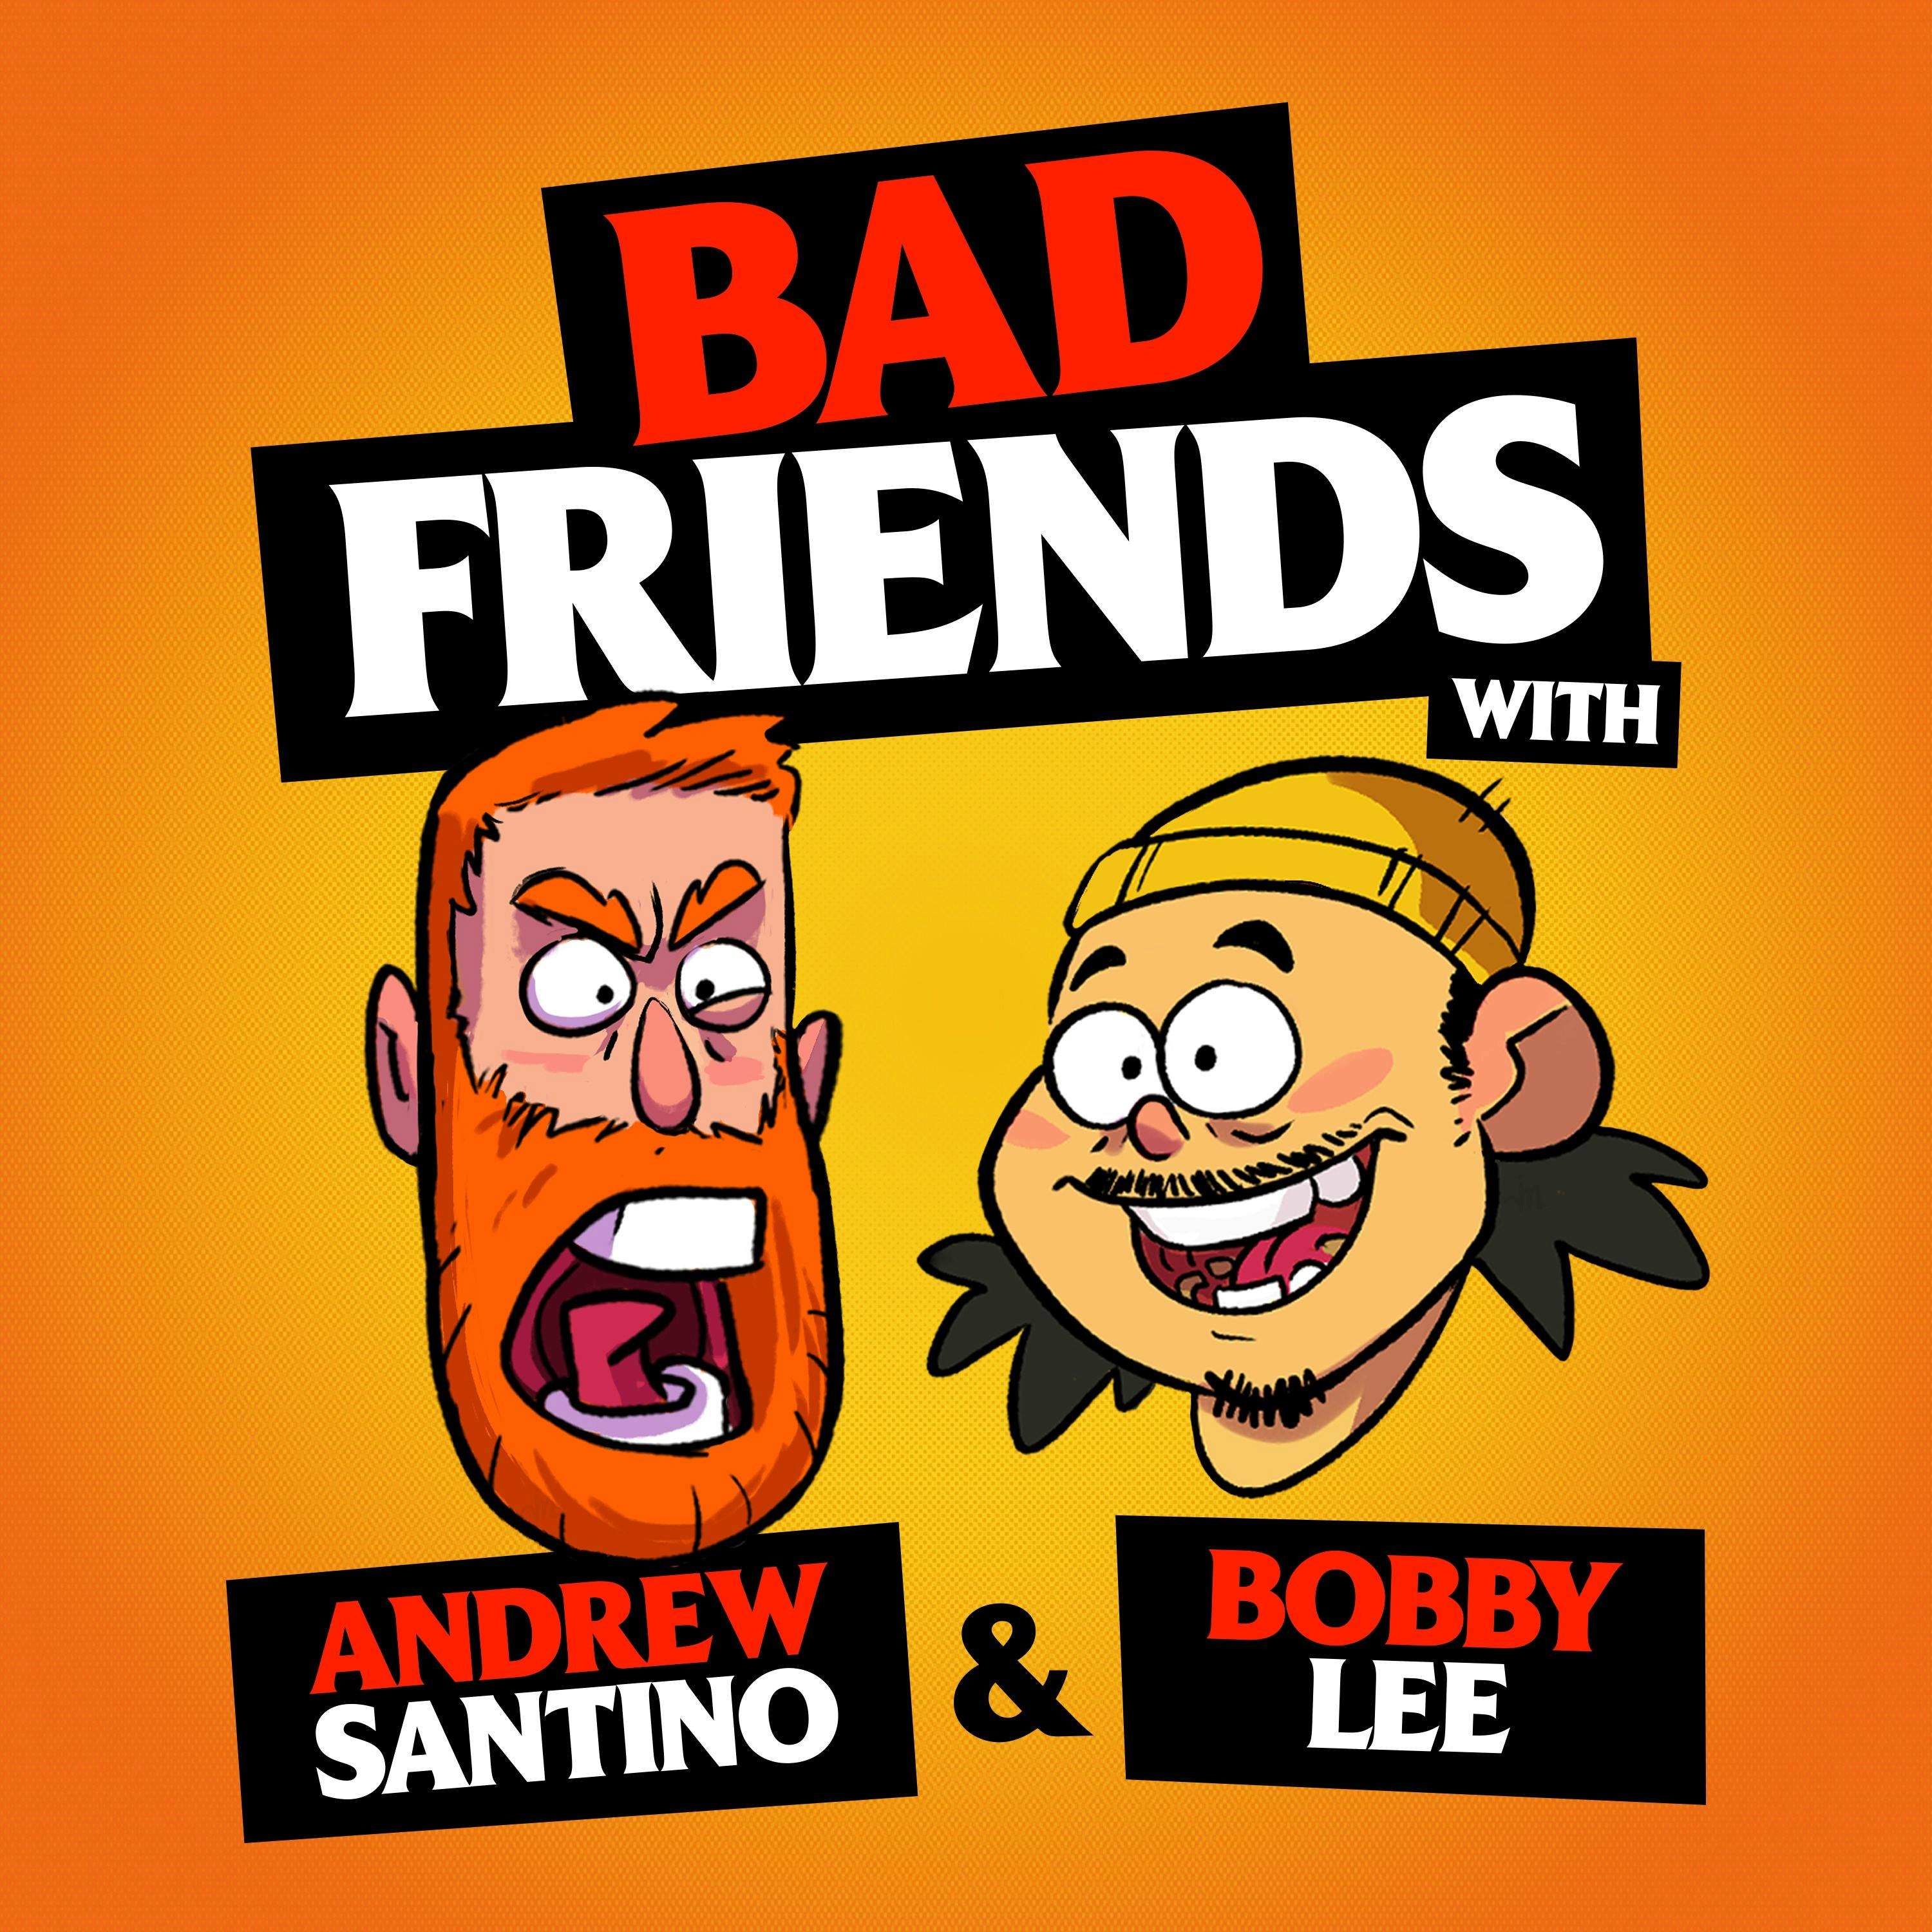 Three Hundred Hussies by Andrew Santino and Bobby Lee